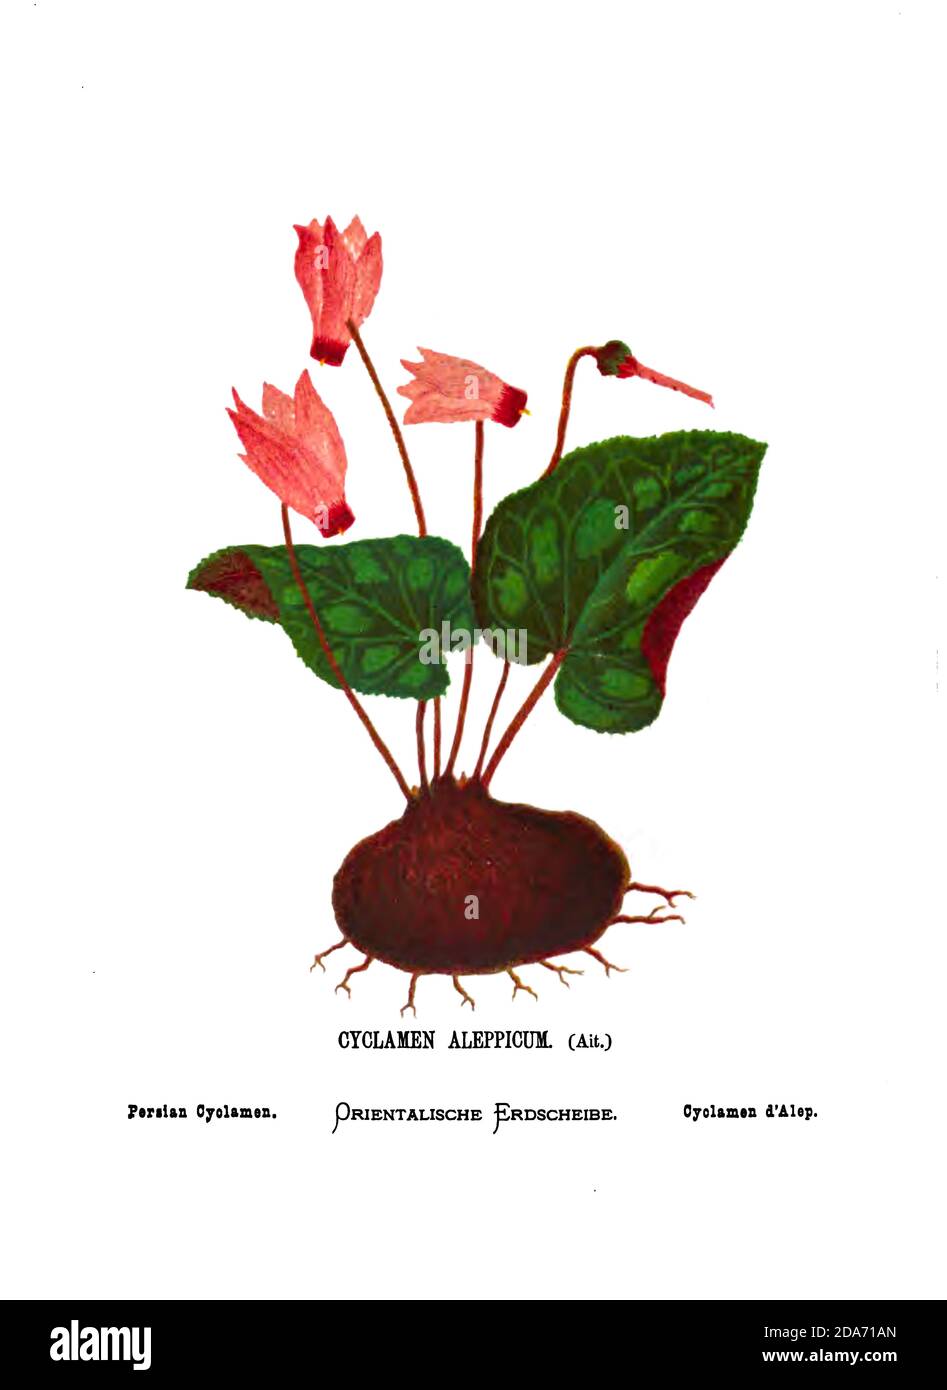 Persian cyclamen (Cyclamen persicum) From the book Wild flowers of the Holy Land: Fifty-Four Plates Printed In Colours, Drawn And Painted After Nature. by Mrs. Hannah Zeller, (Gobat); Tristram, H. B. (Henry Baker), and Edward Atkinson, Published in London by James Nisbet & Co 1876 on white background Stock Photo